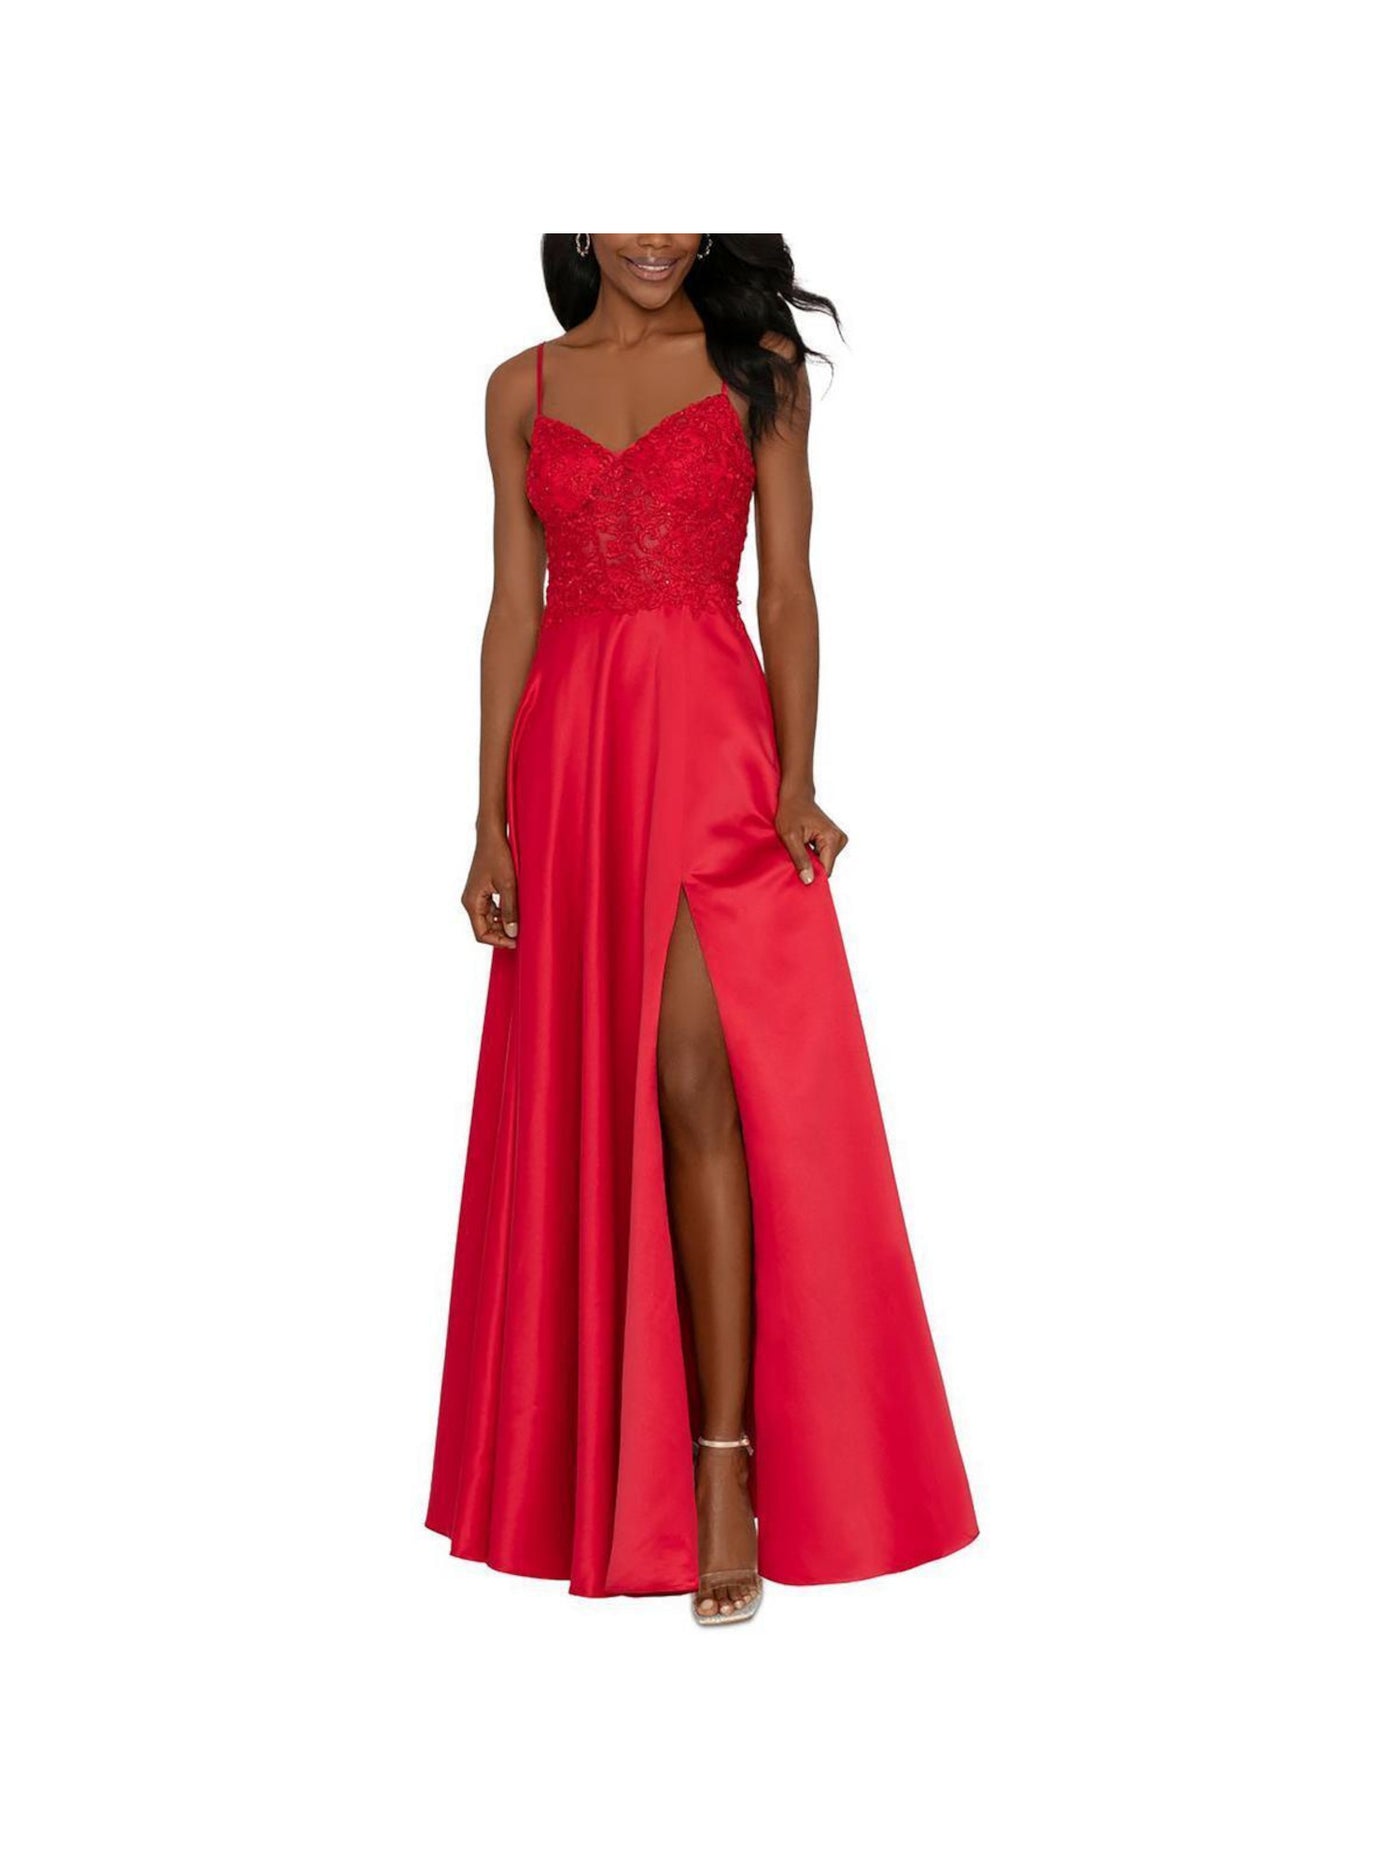 BLONDIE NITES Womens Red Embellished Zippered Padded Lace Up Back Slit Lined Spaghetti Strap Sweetheart Neckline Full-Length Formal Gown Dress Juniors 3